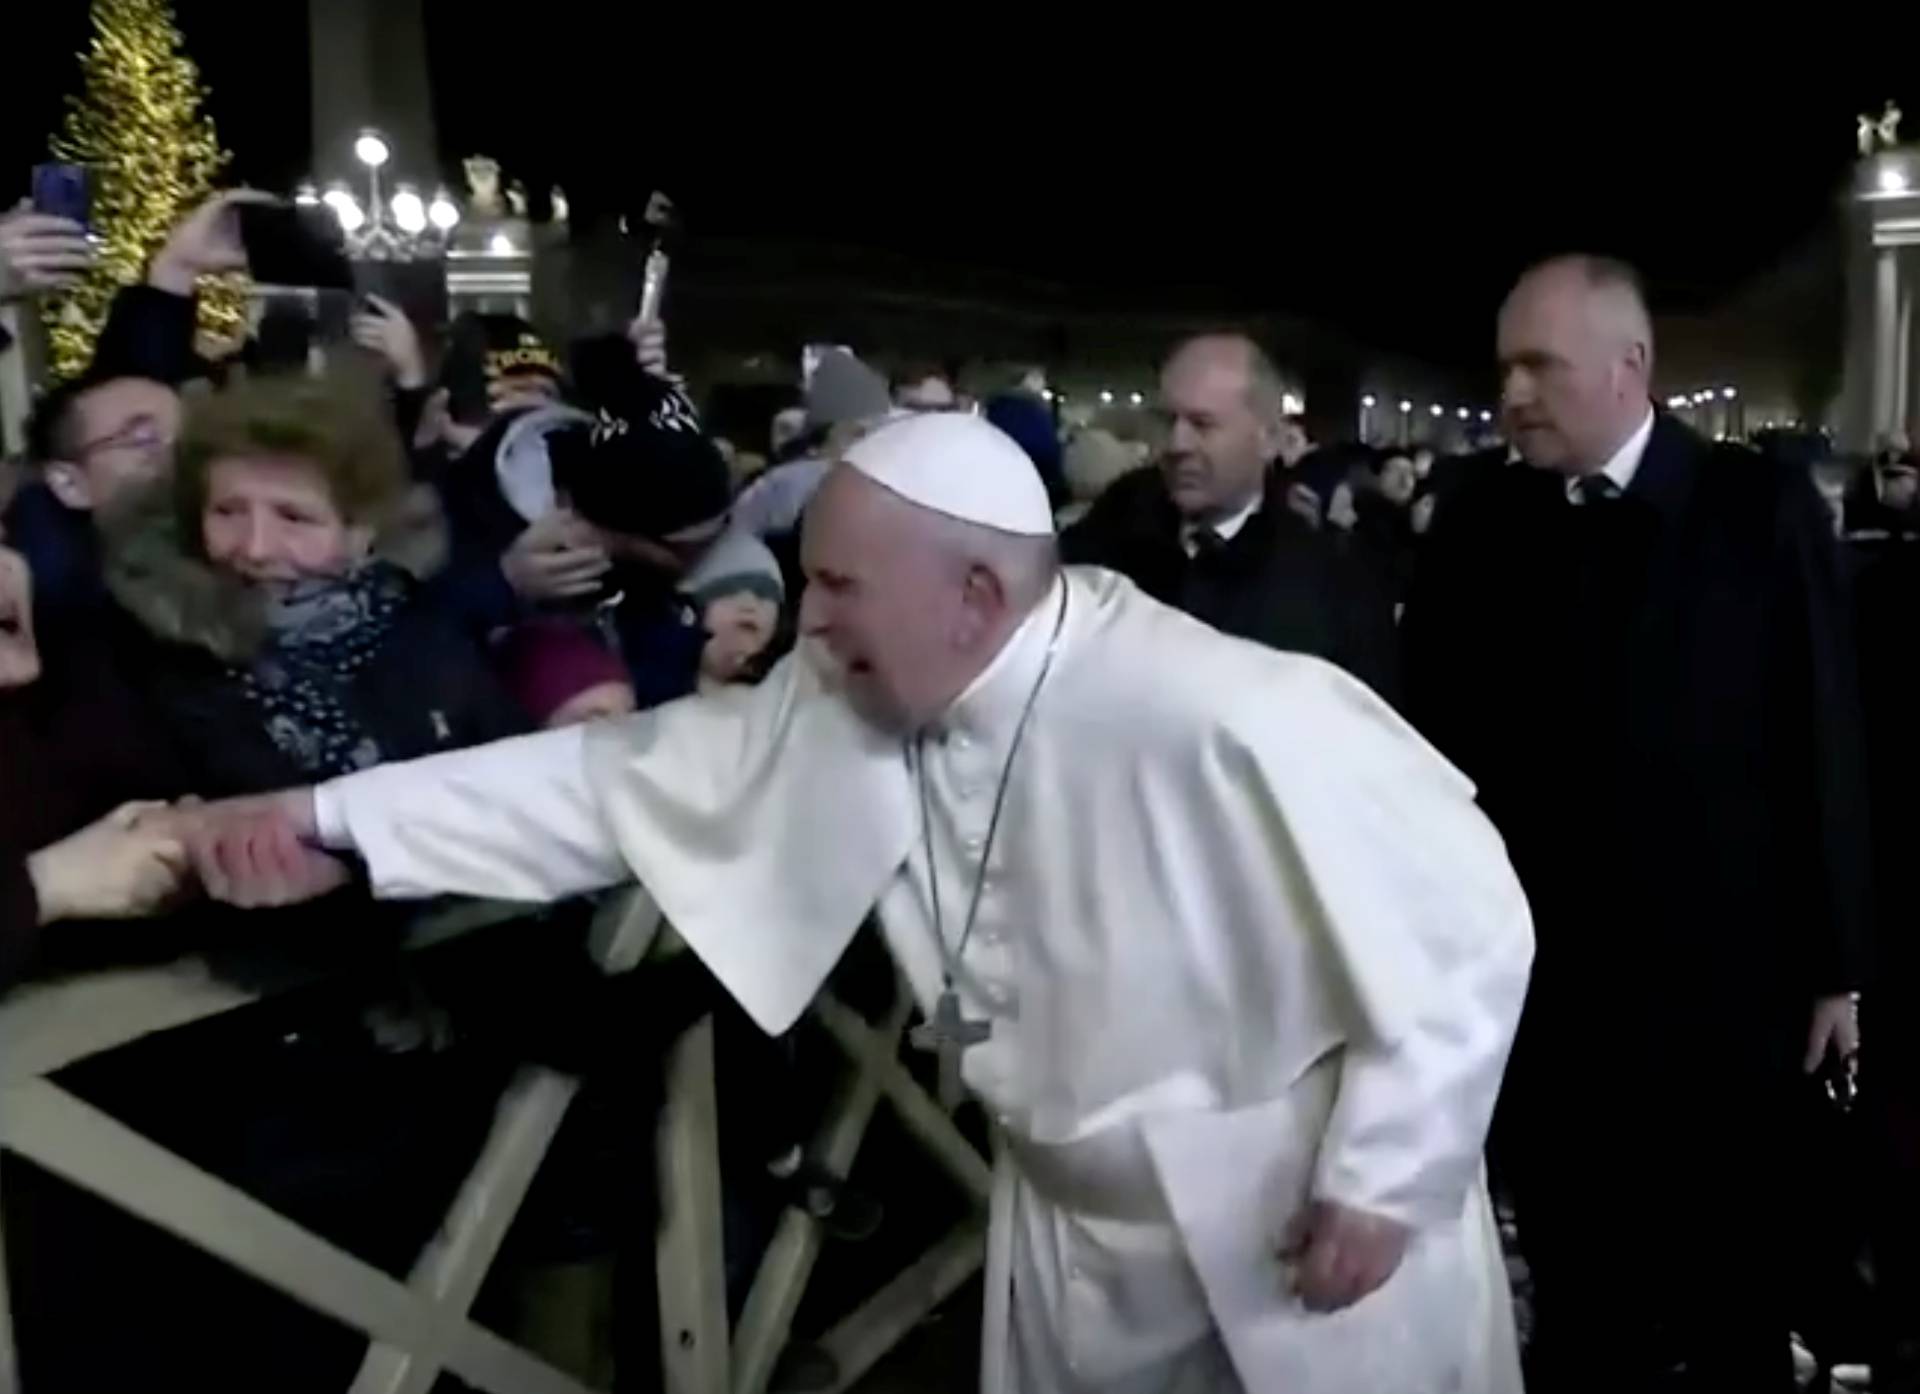 A woman grabs Pope Francis' hand and yanks him towards her, at Saint Peter's Square at the Vatican